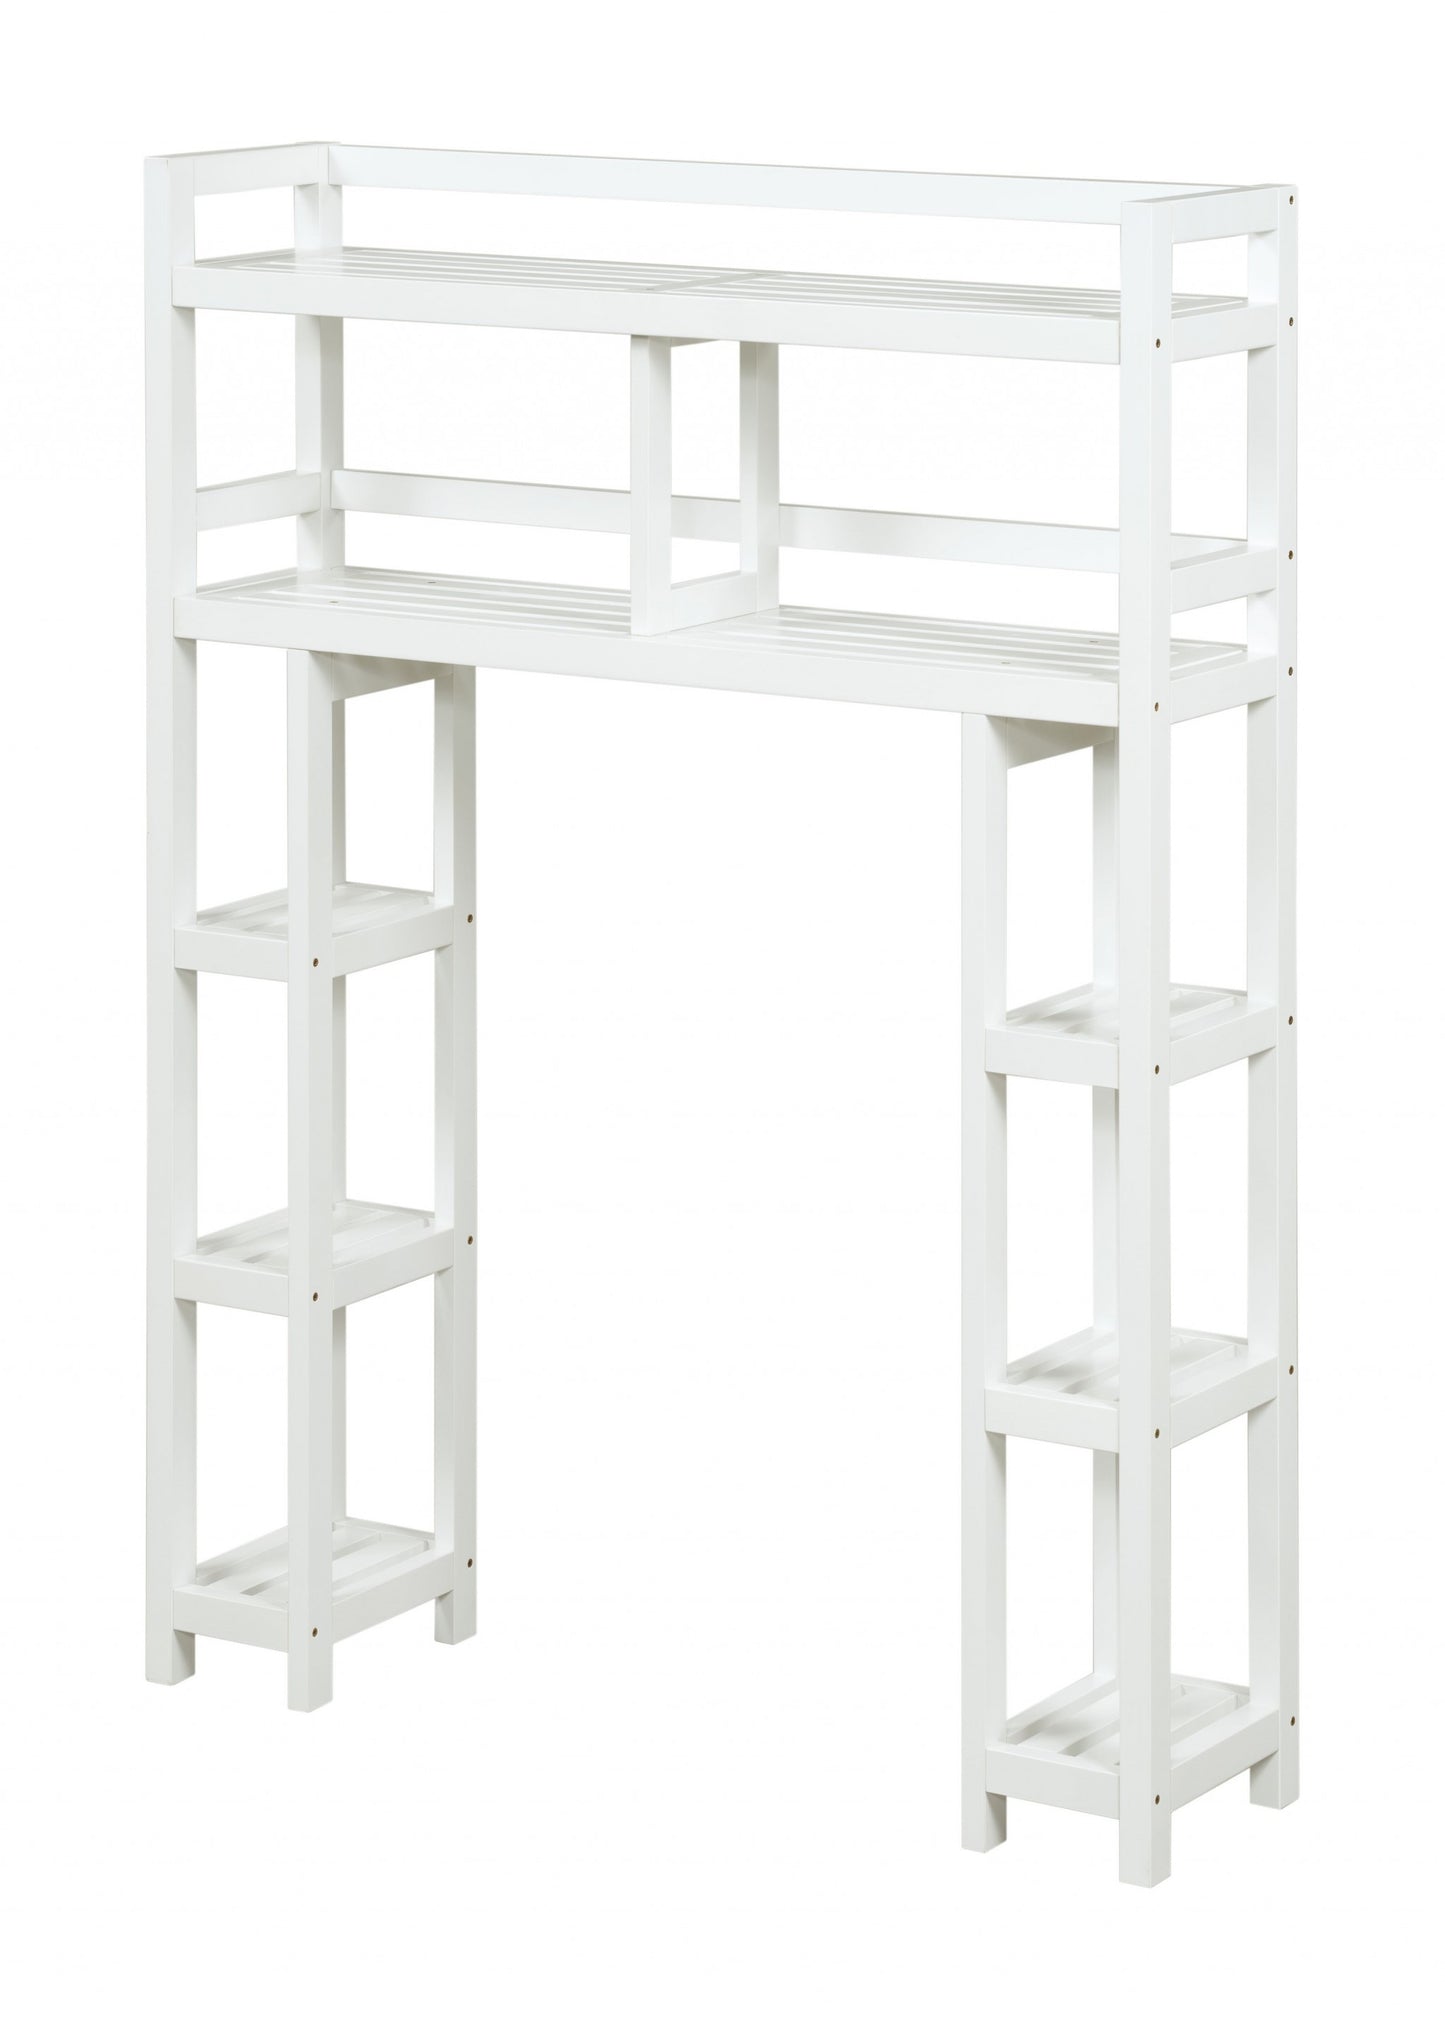 White Finish 2 Tier Solid Wood Over Toilet Organizer